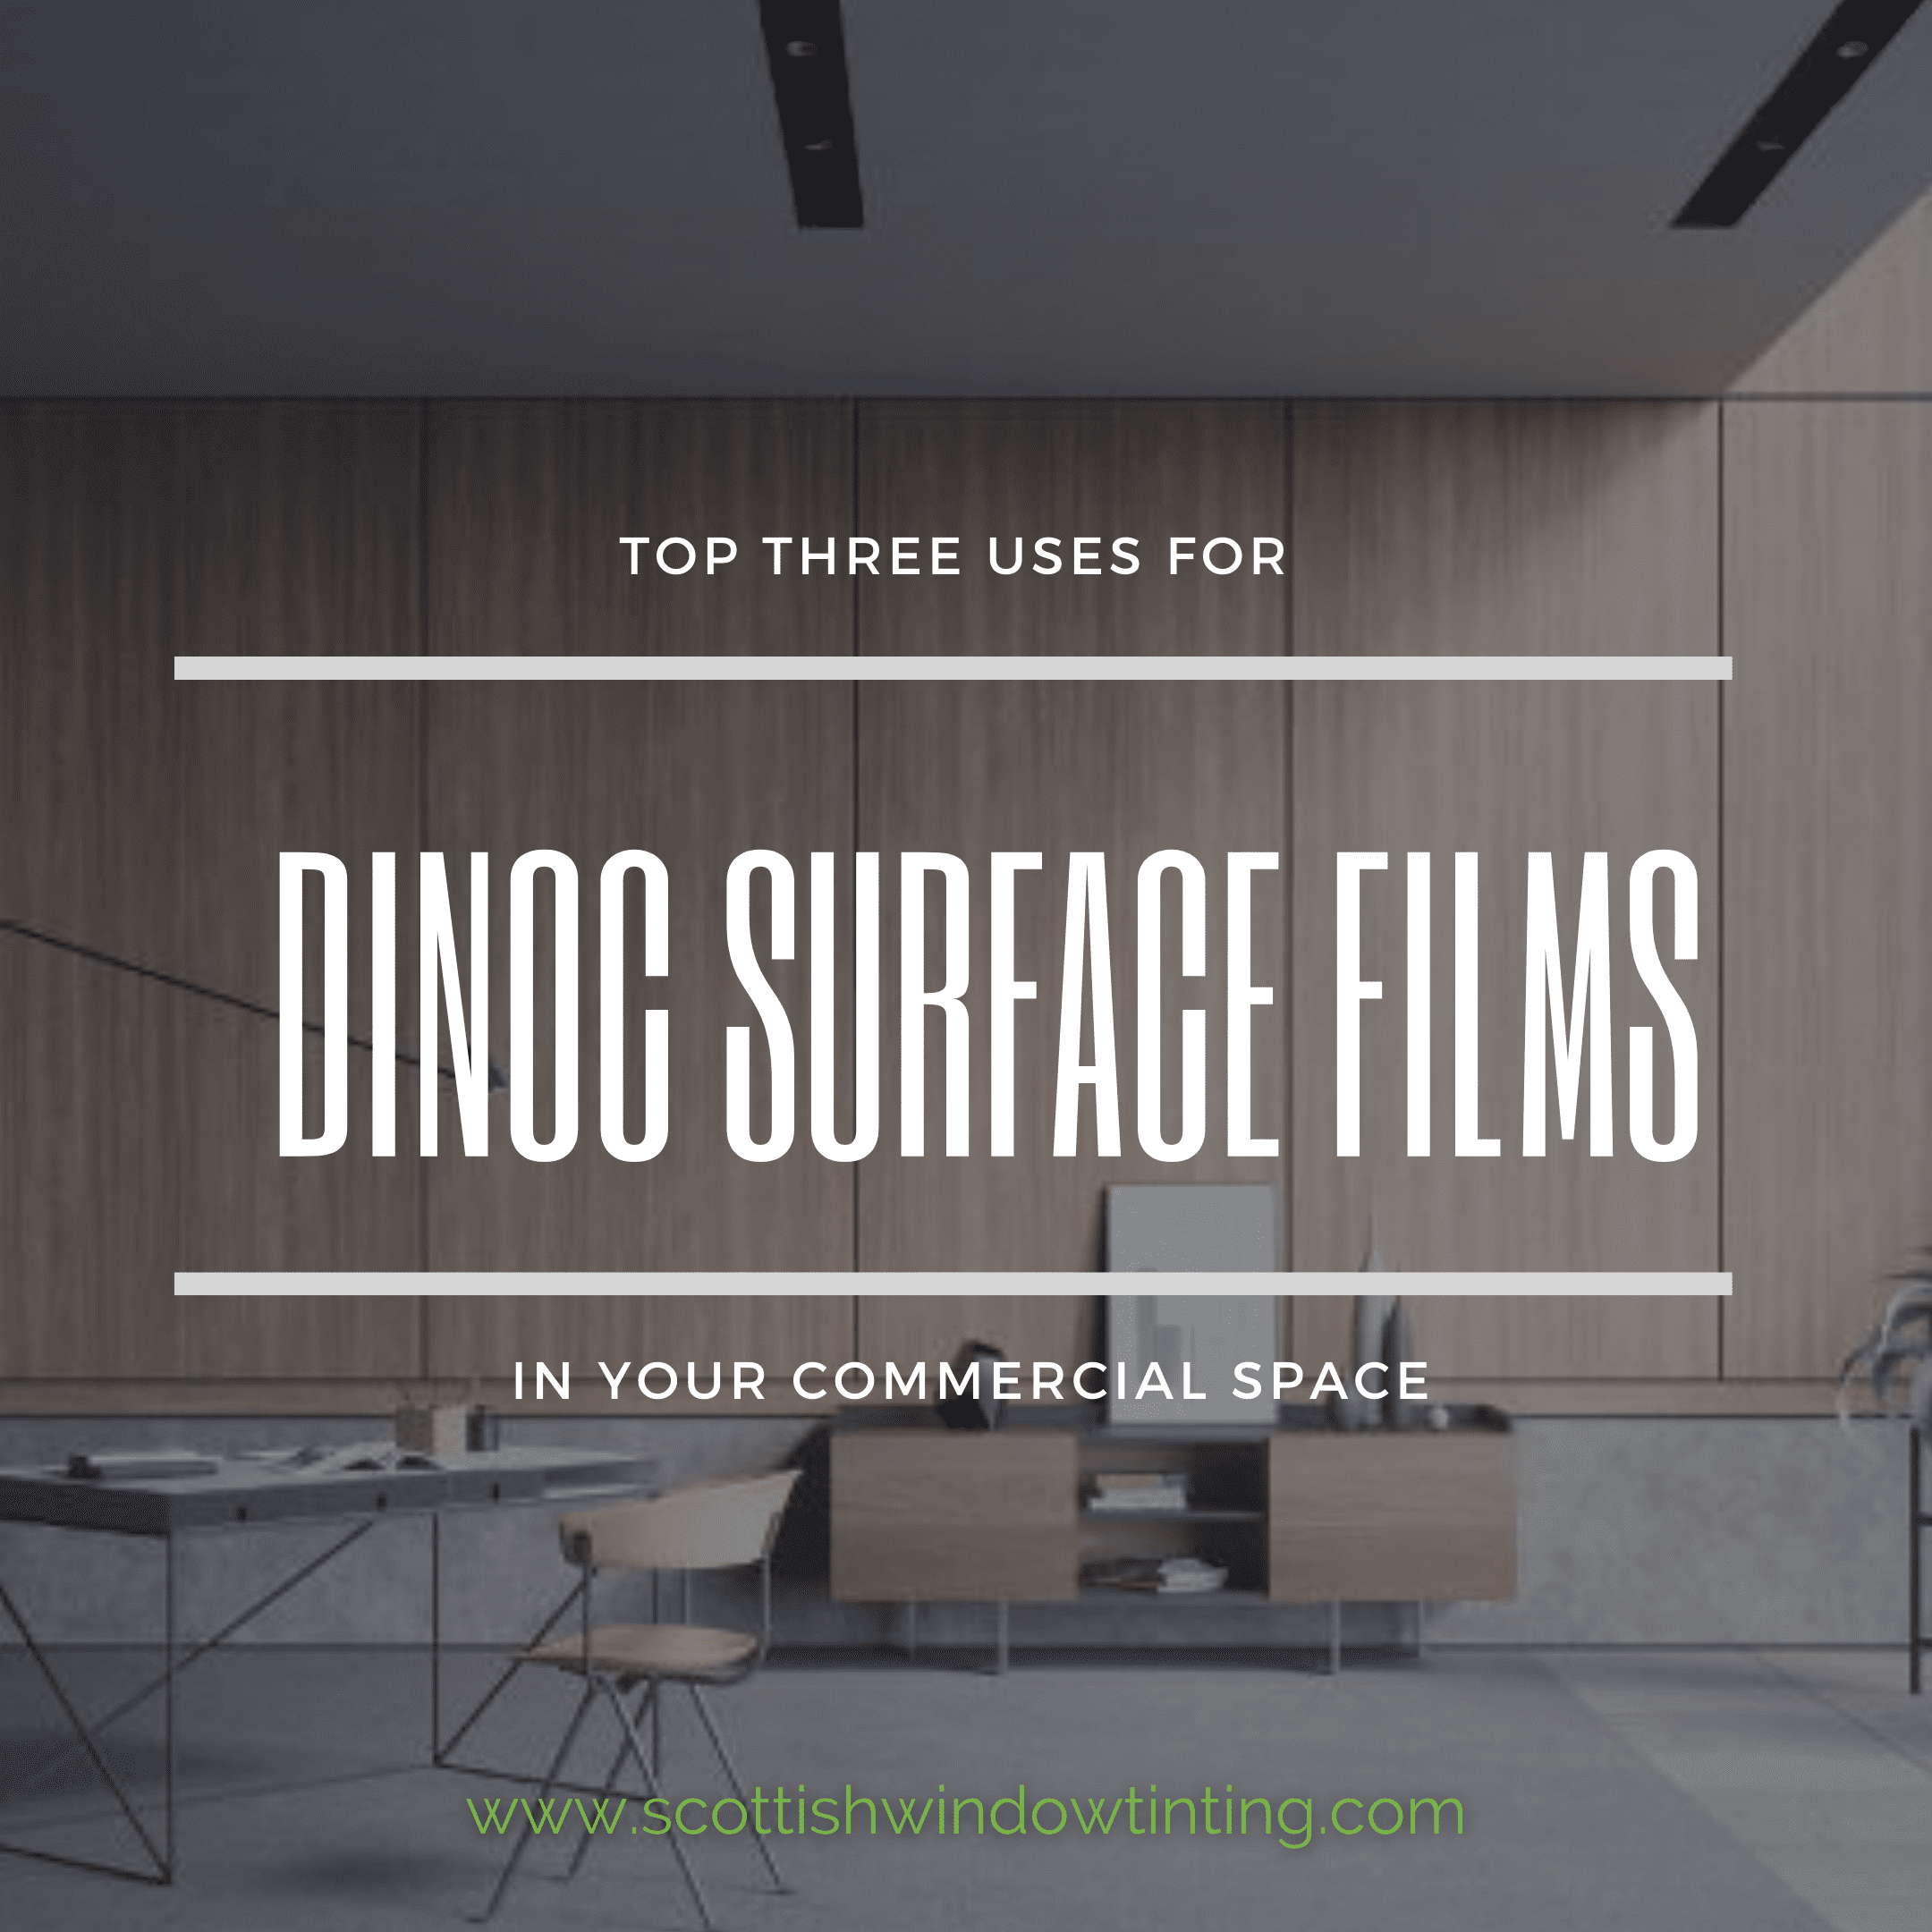 The Top Three Uses For DI-NOC Surface Films